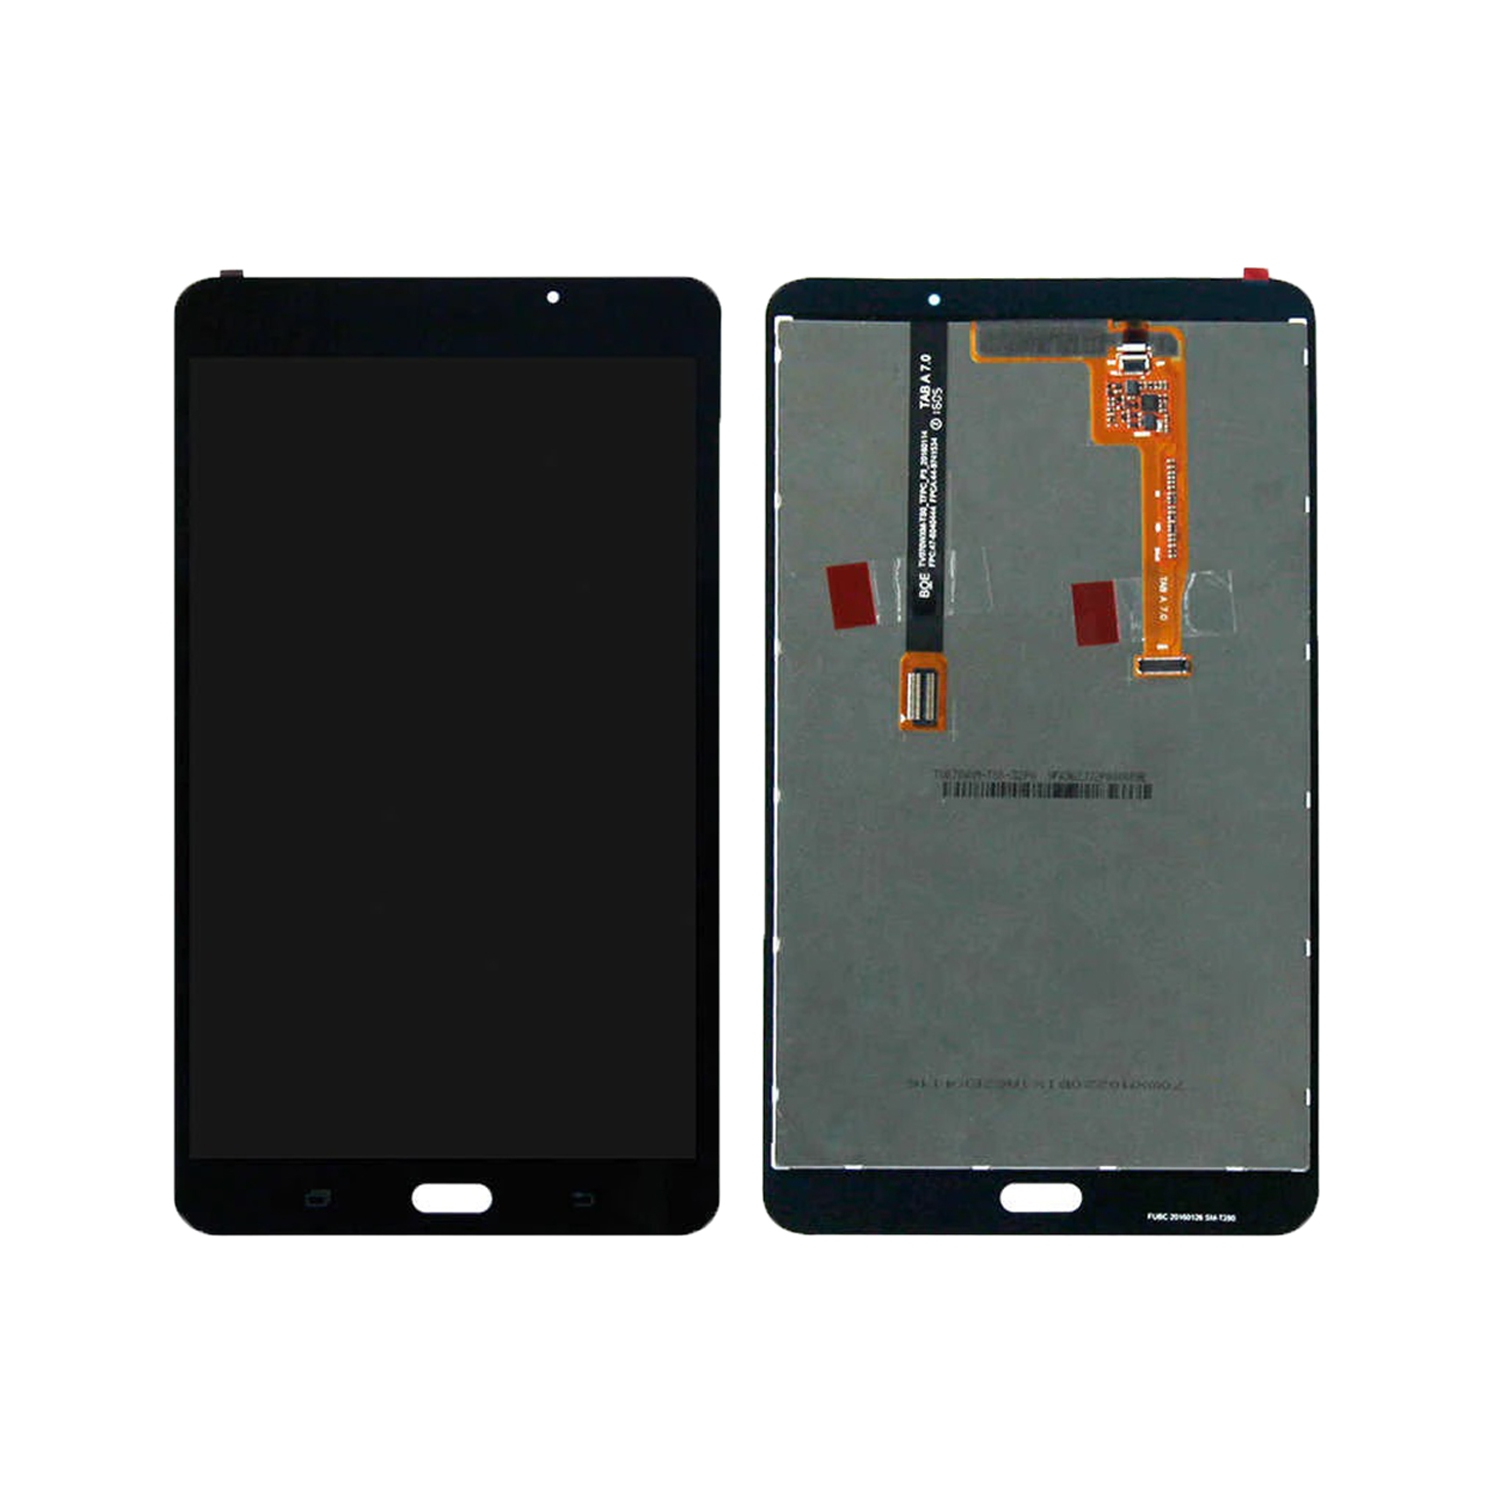 Replacement LCD Display Touch Screen Digitizer Assembly For Samsung Galaxy Tab A 7.0 SM-T280 (2016) - Black